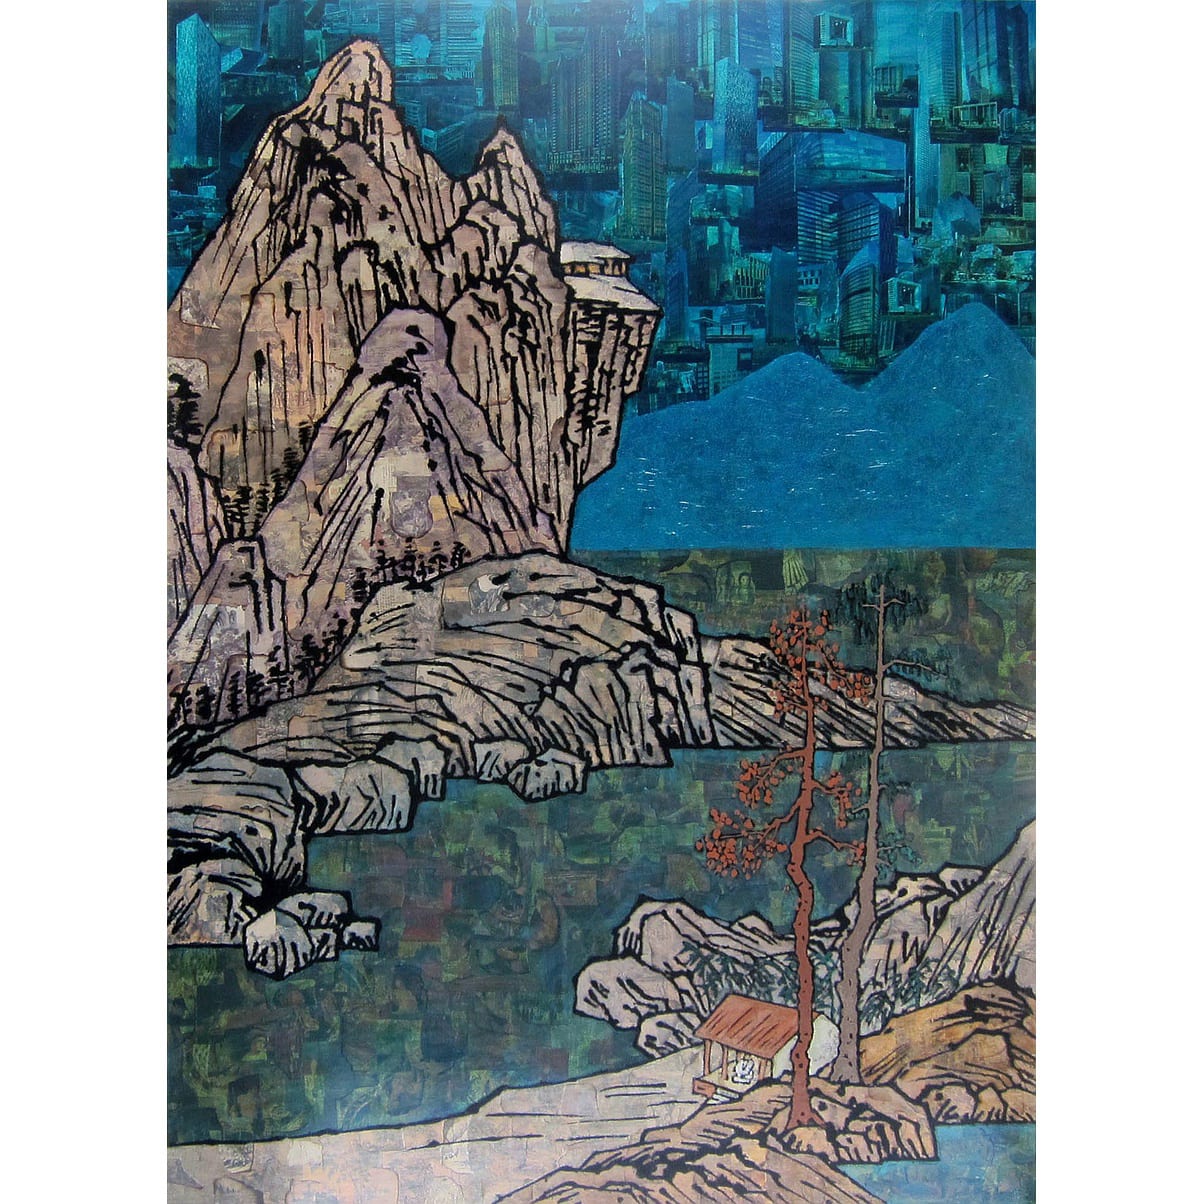 Xue Song 薛 松, Landscape of Tranquility, 2011